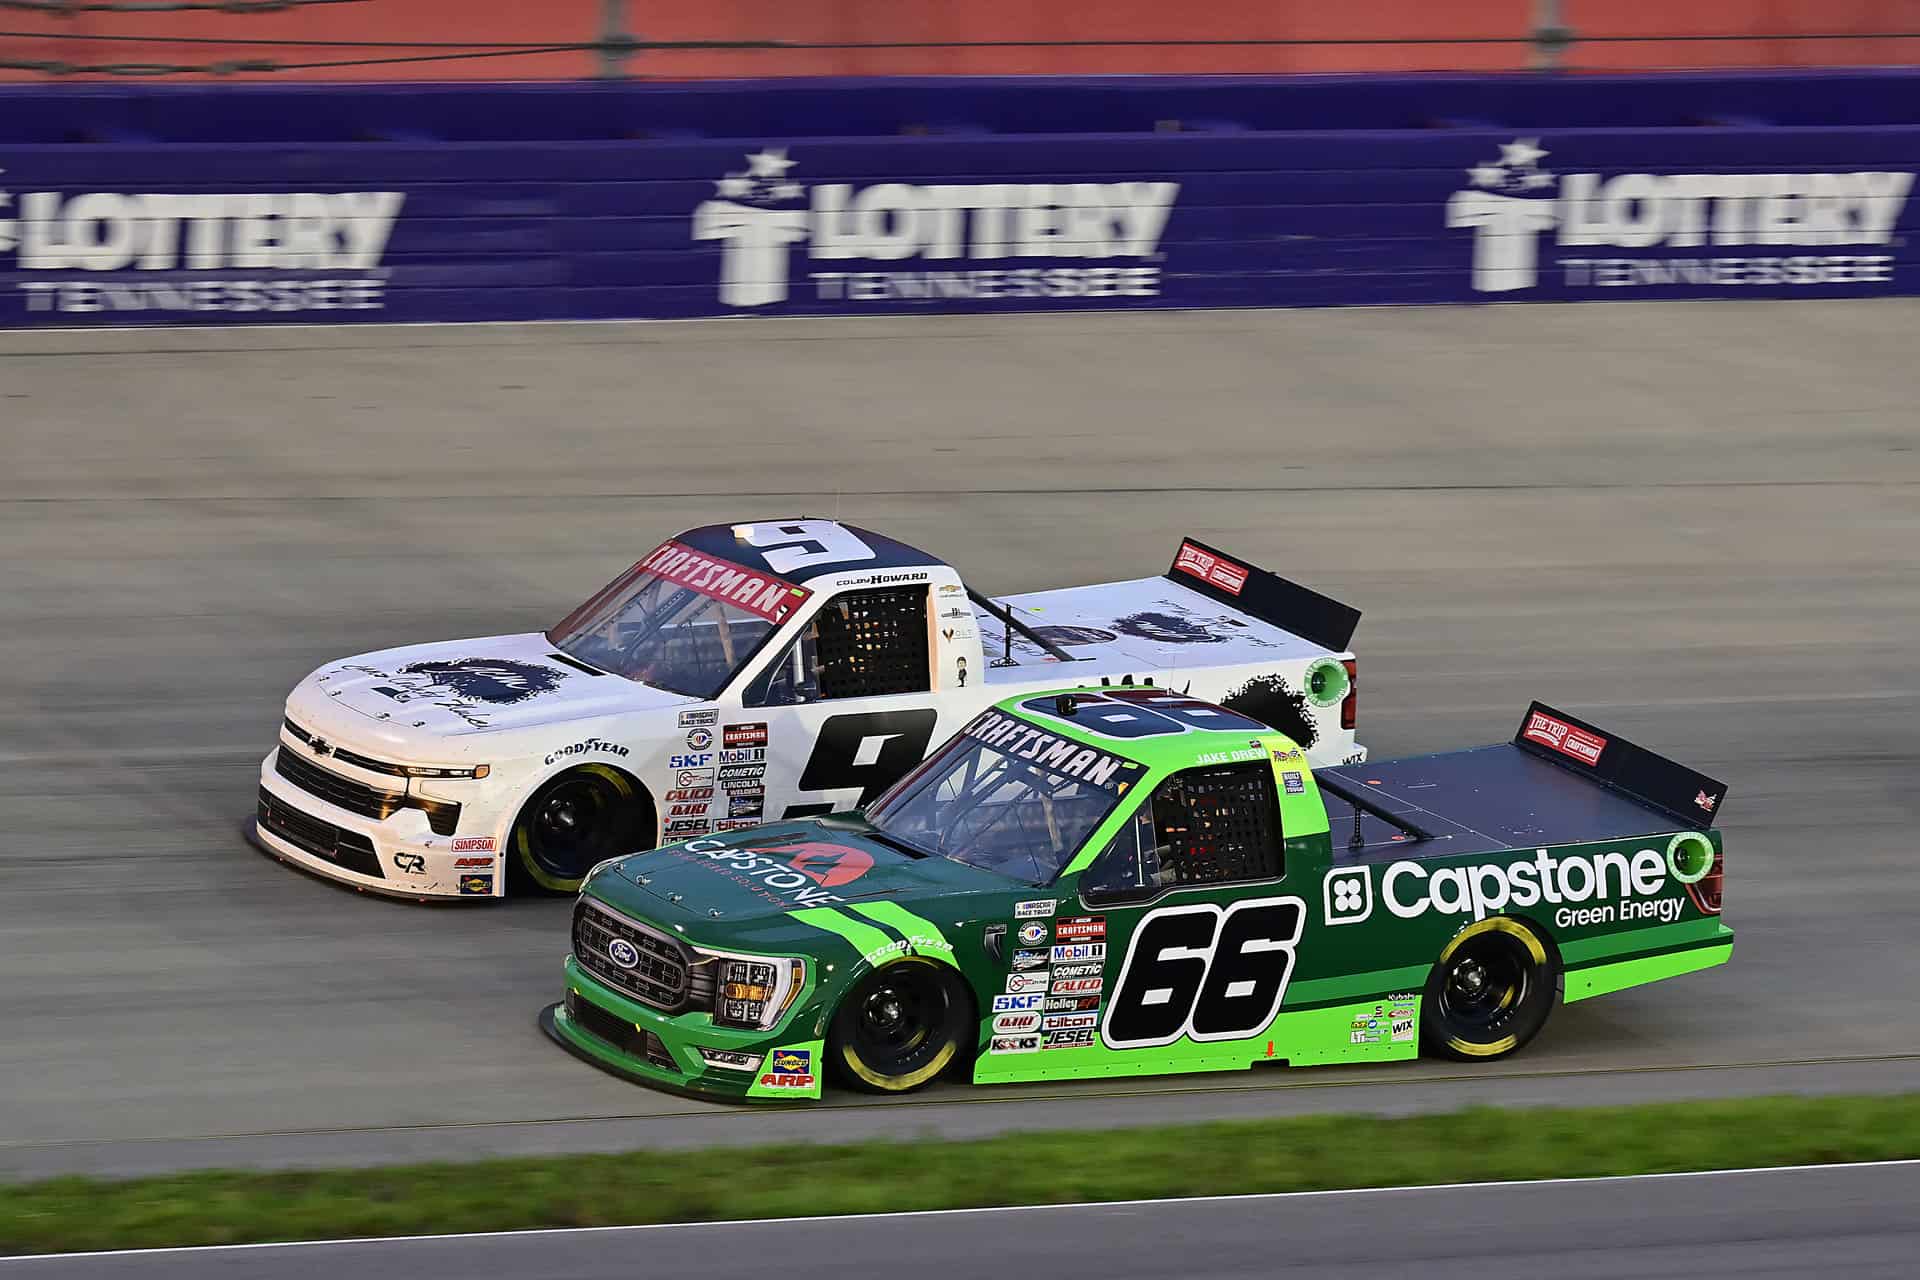 Jake Drew races at Nashville Superspeedway in the NASCAR Craftsman Truck Series for Thorsport Racing.